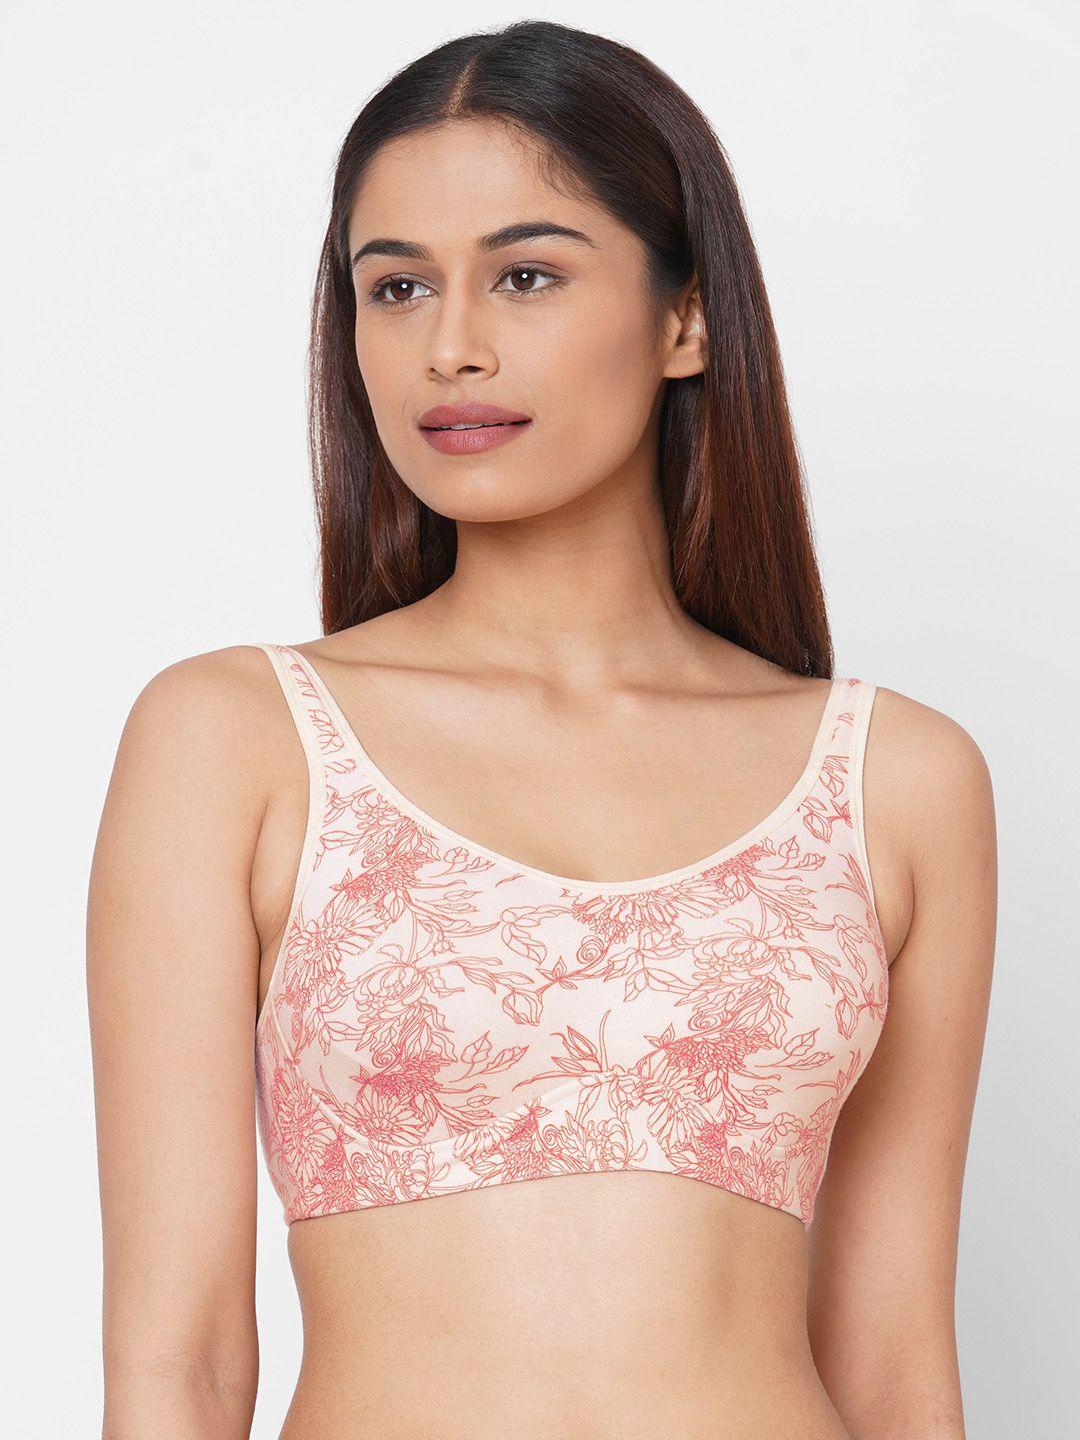 inner sense white & pink organic cotton antimicrobial sustainable full coverage printed bra isb097